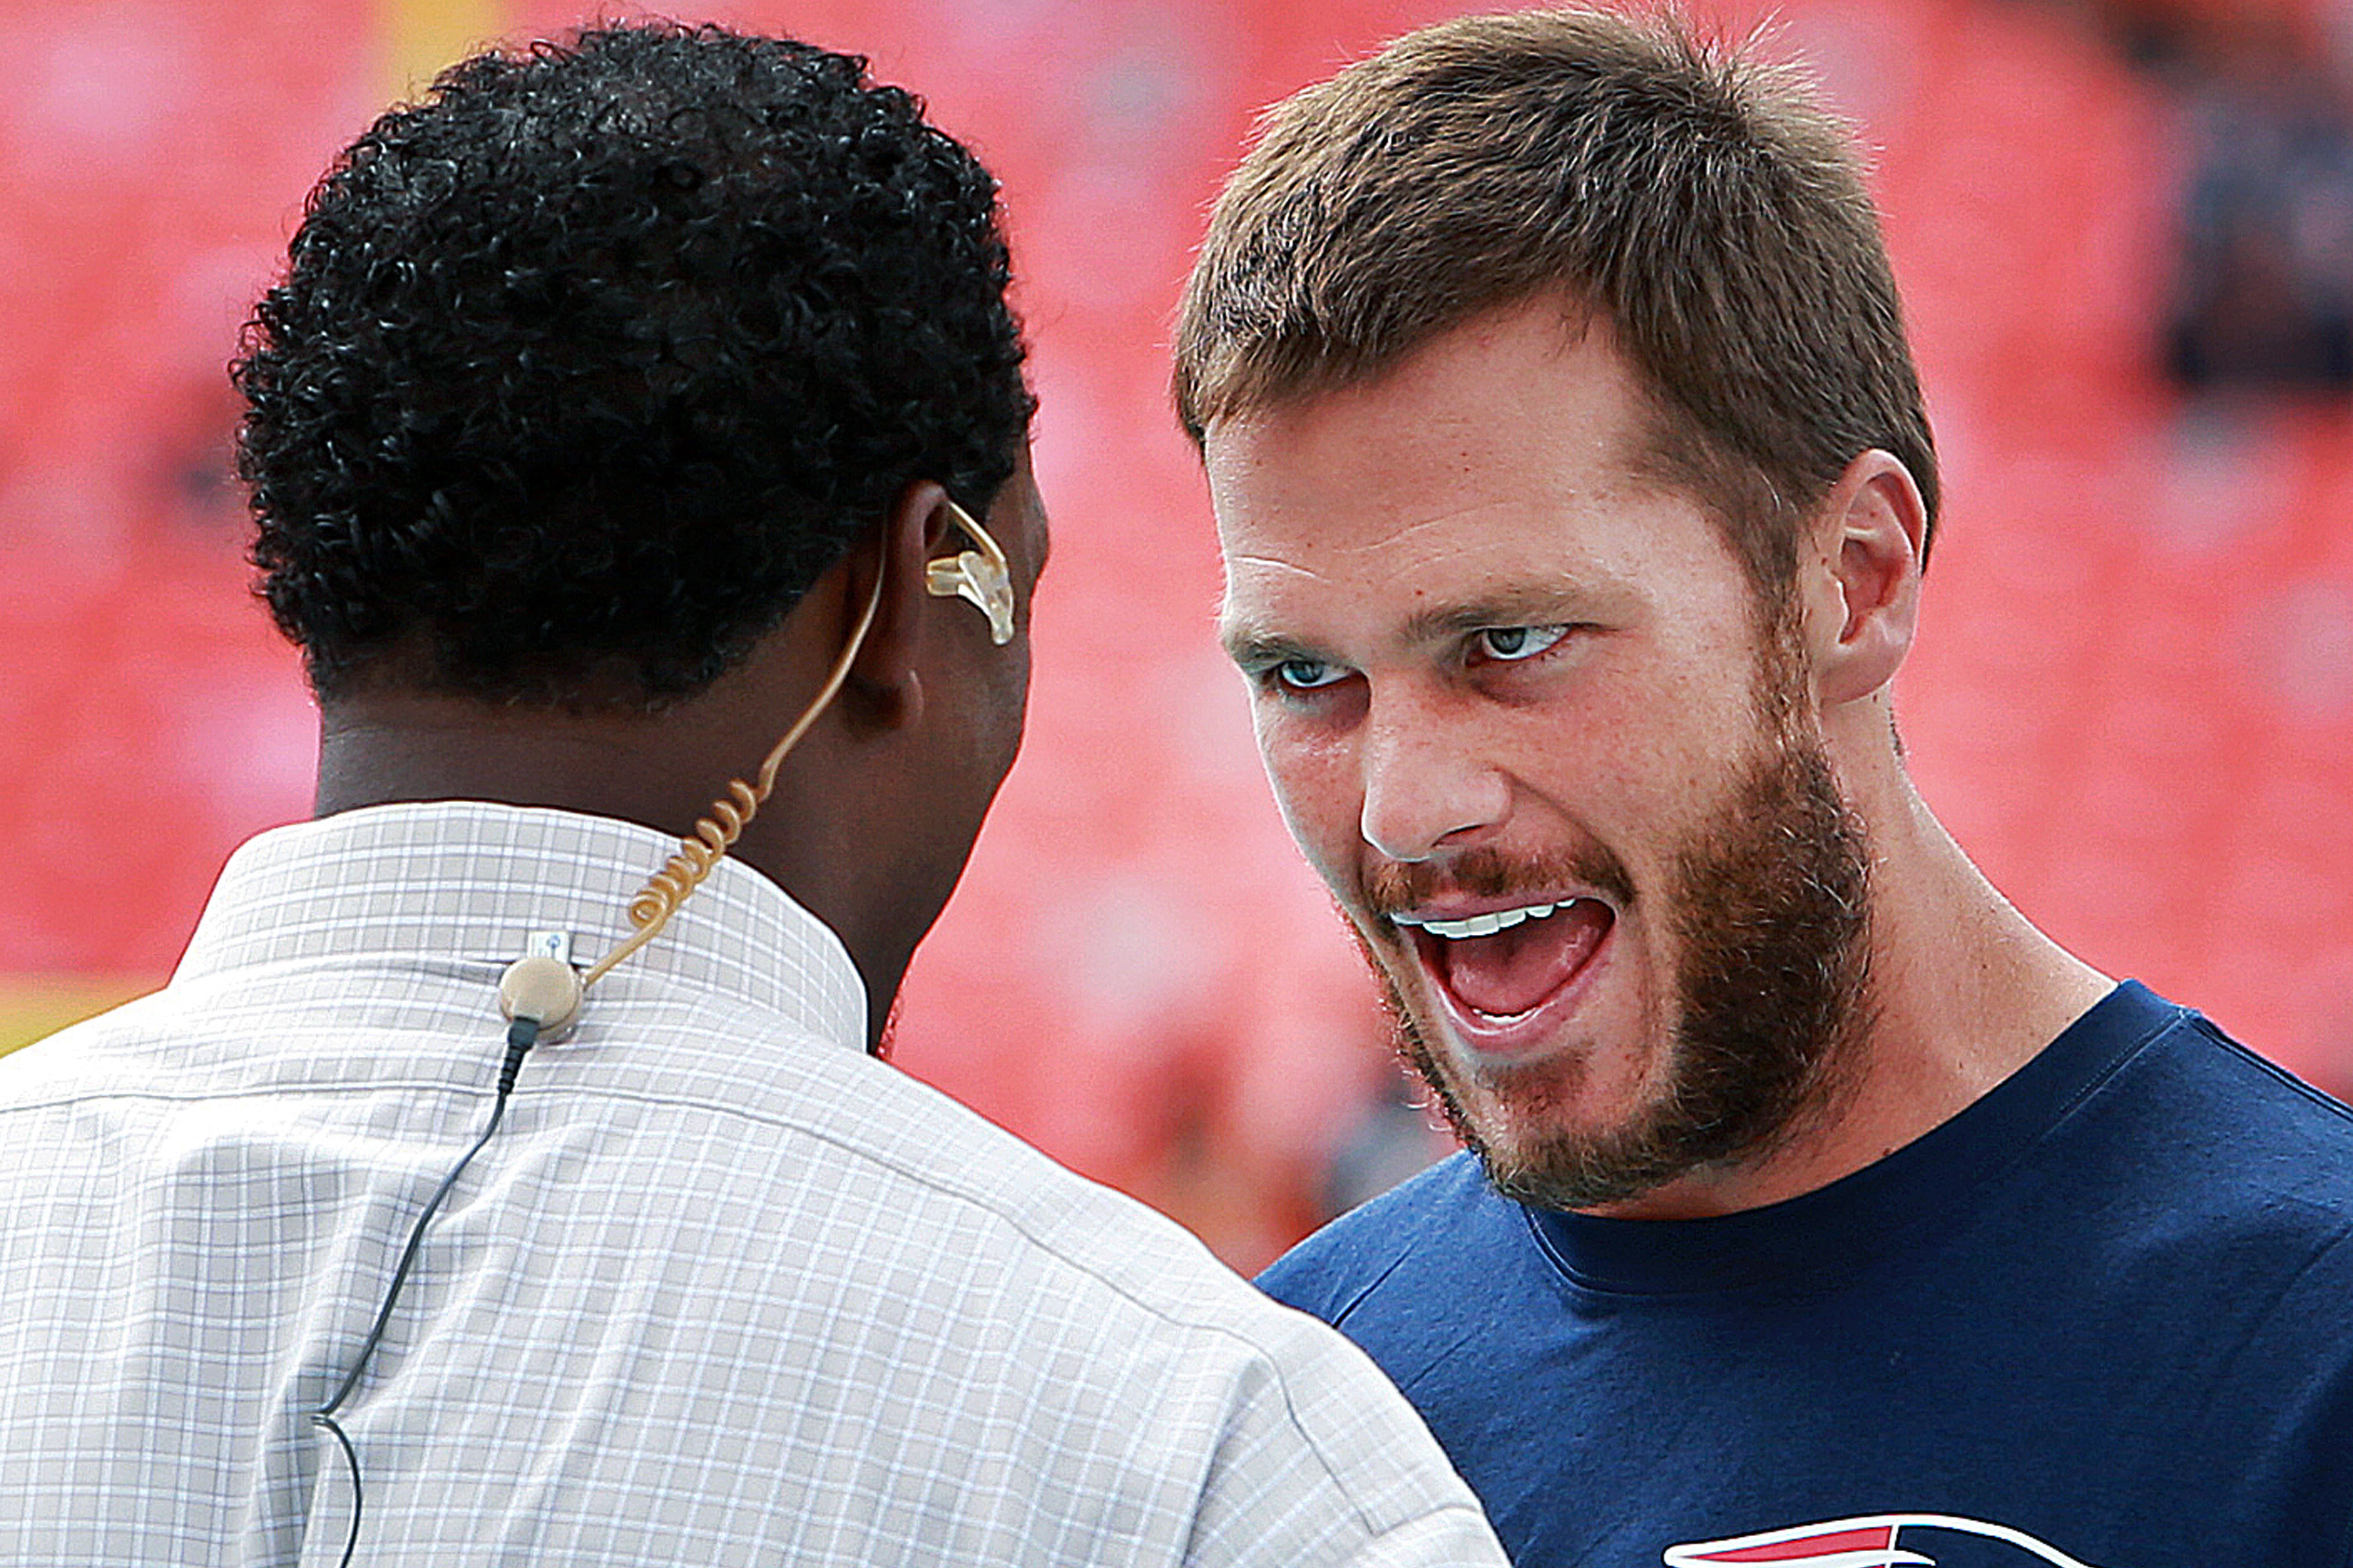 Patriots quarterback Tom Brady, right, chatted with former teammate Willie McGinest, left, now of the NFL Network before the Patriots faced the Miami Dolphins on Sept. 14. (Boston Globe&mdash;Boston Globe via Getty Images)